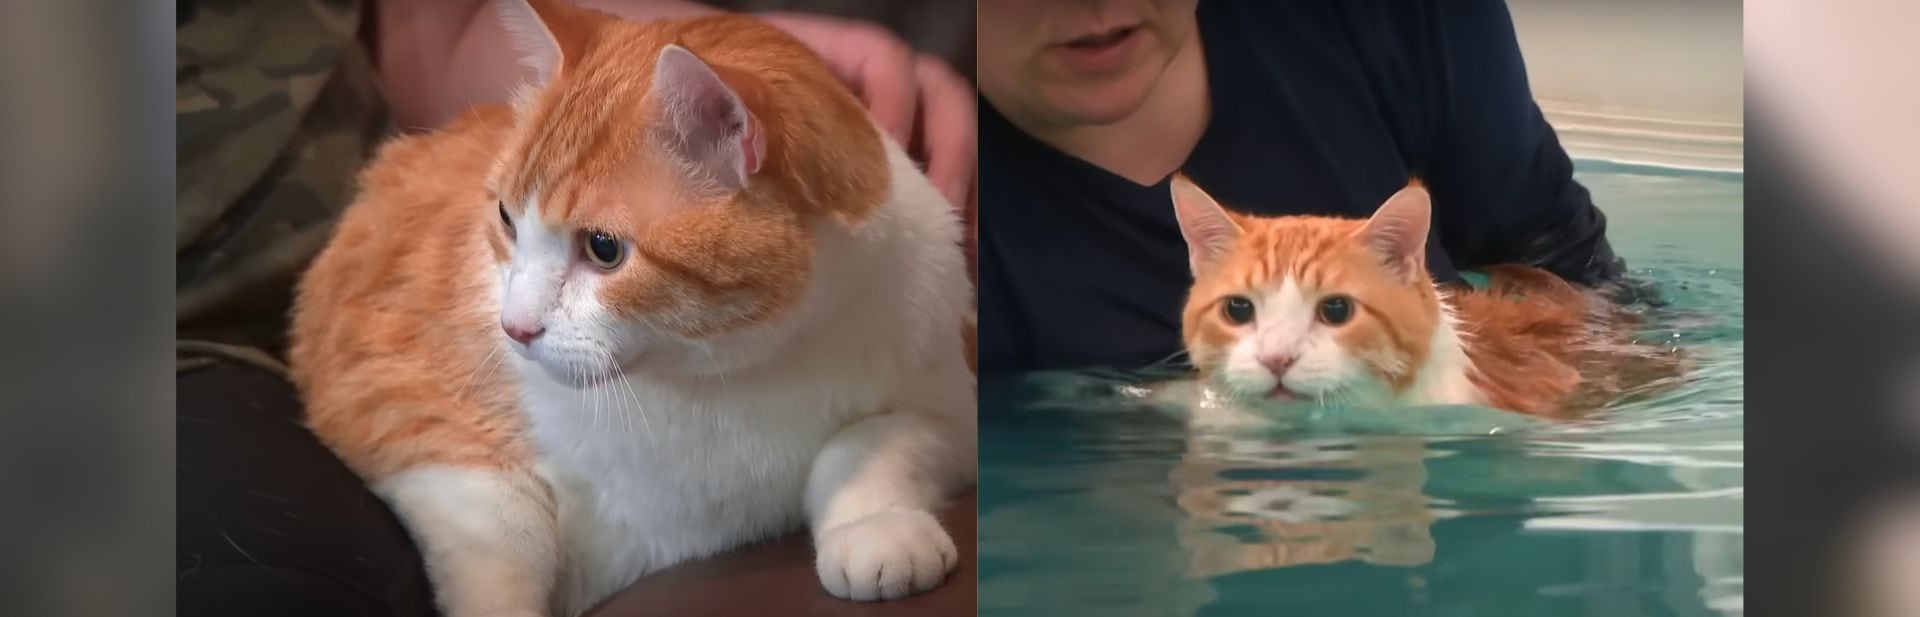 Fat Cat “Peaches” Goes Viral Over Surprising Weight Loss Routine